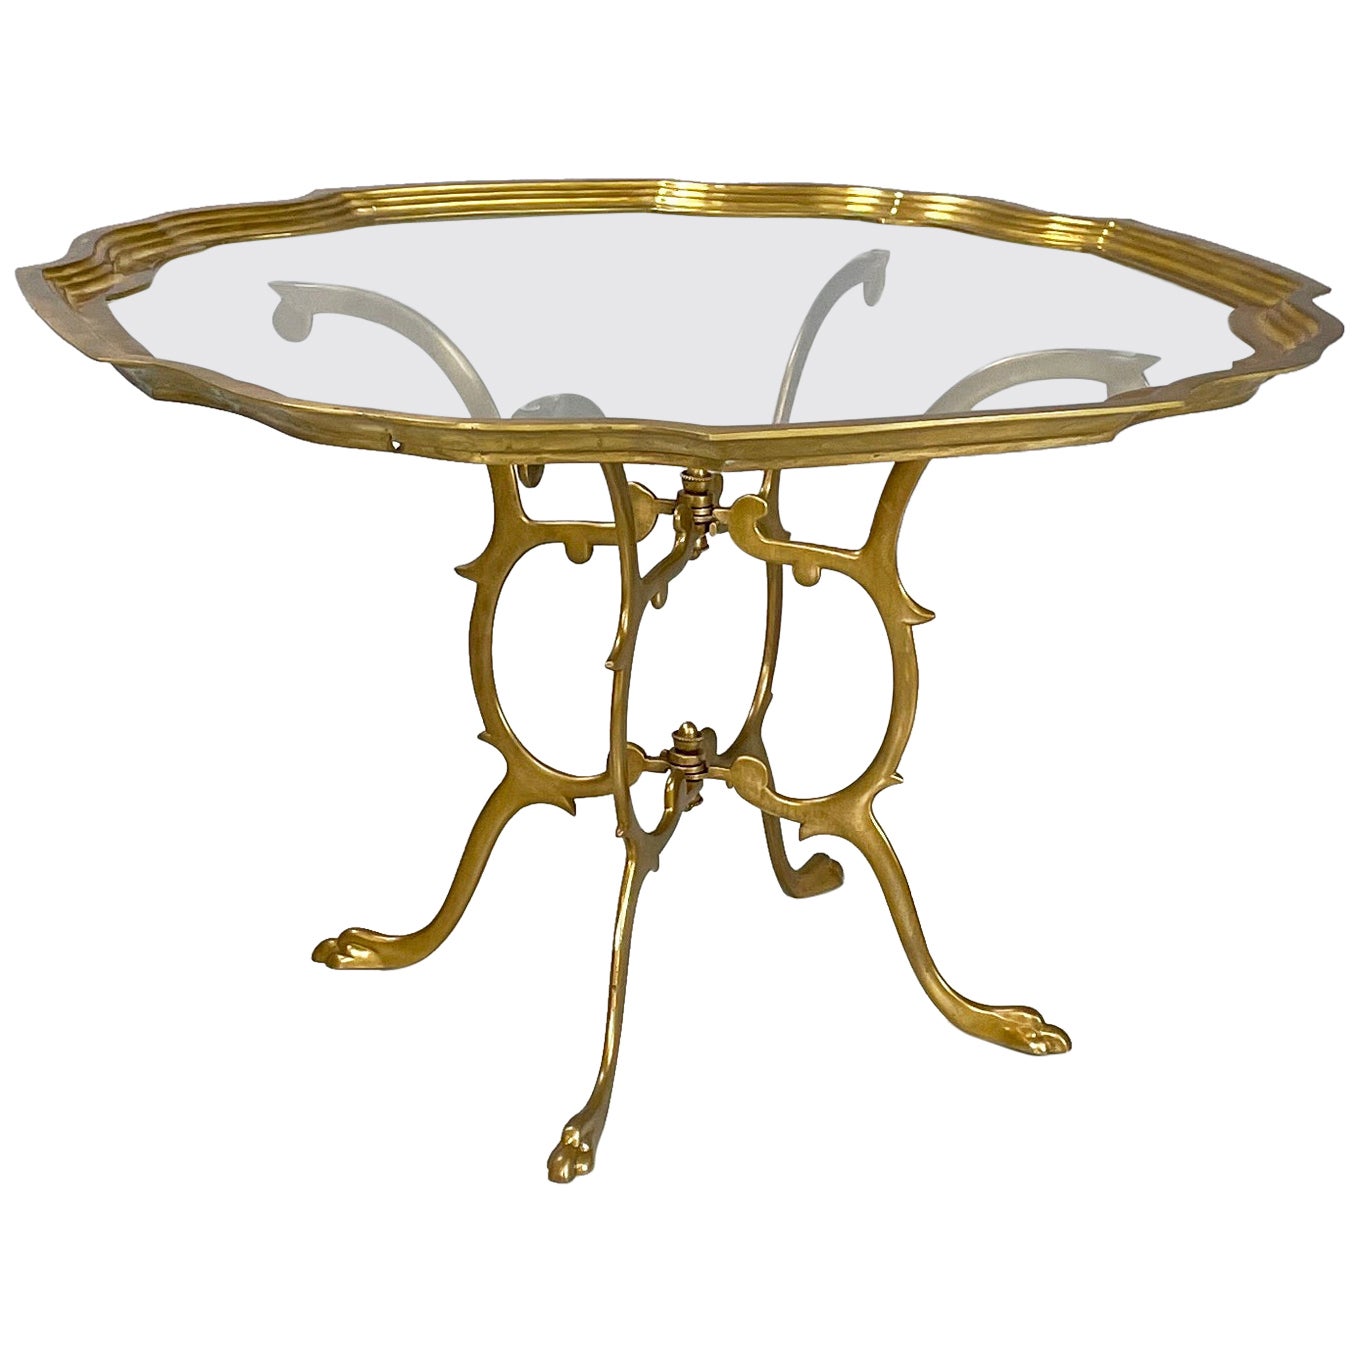 Italian mid-century modern Coffee table in glass and brass, 1960s For Sale